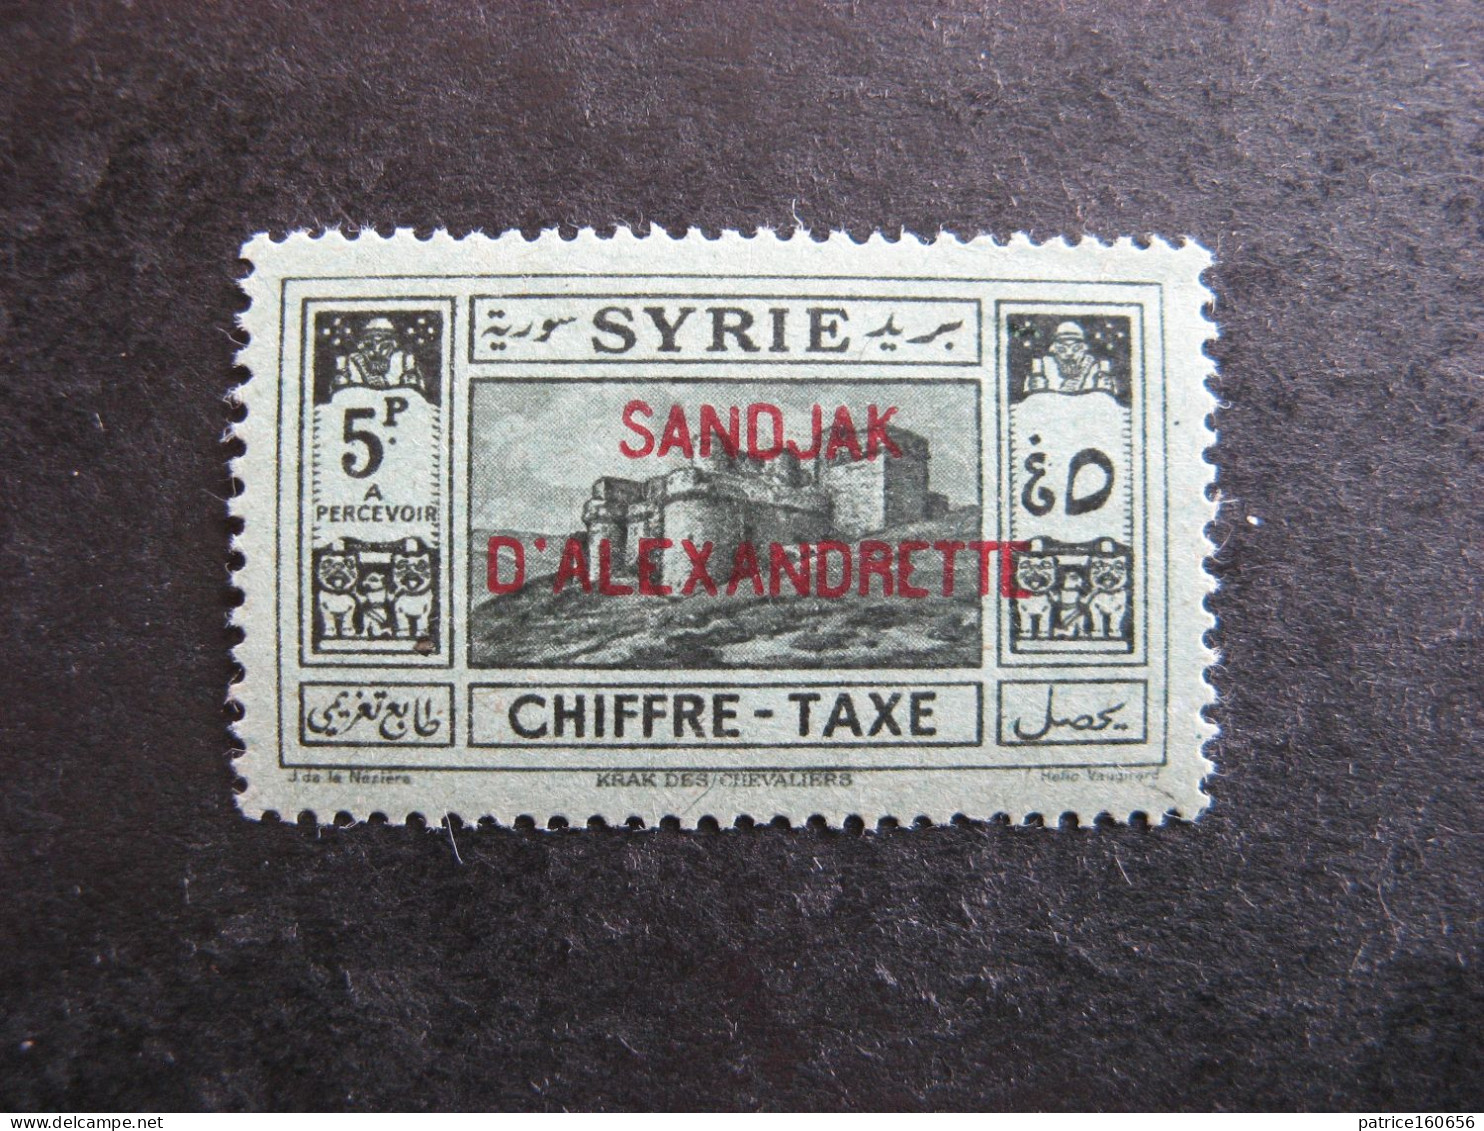 Alexandrette. TB Timbre-Taxe N° 5, Neuf X. - Unused Stamps